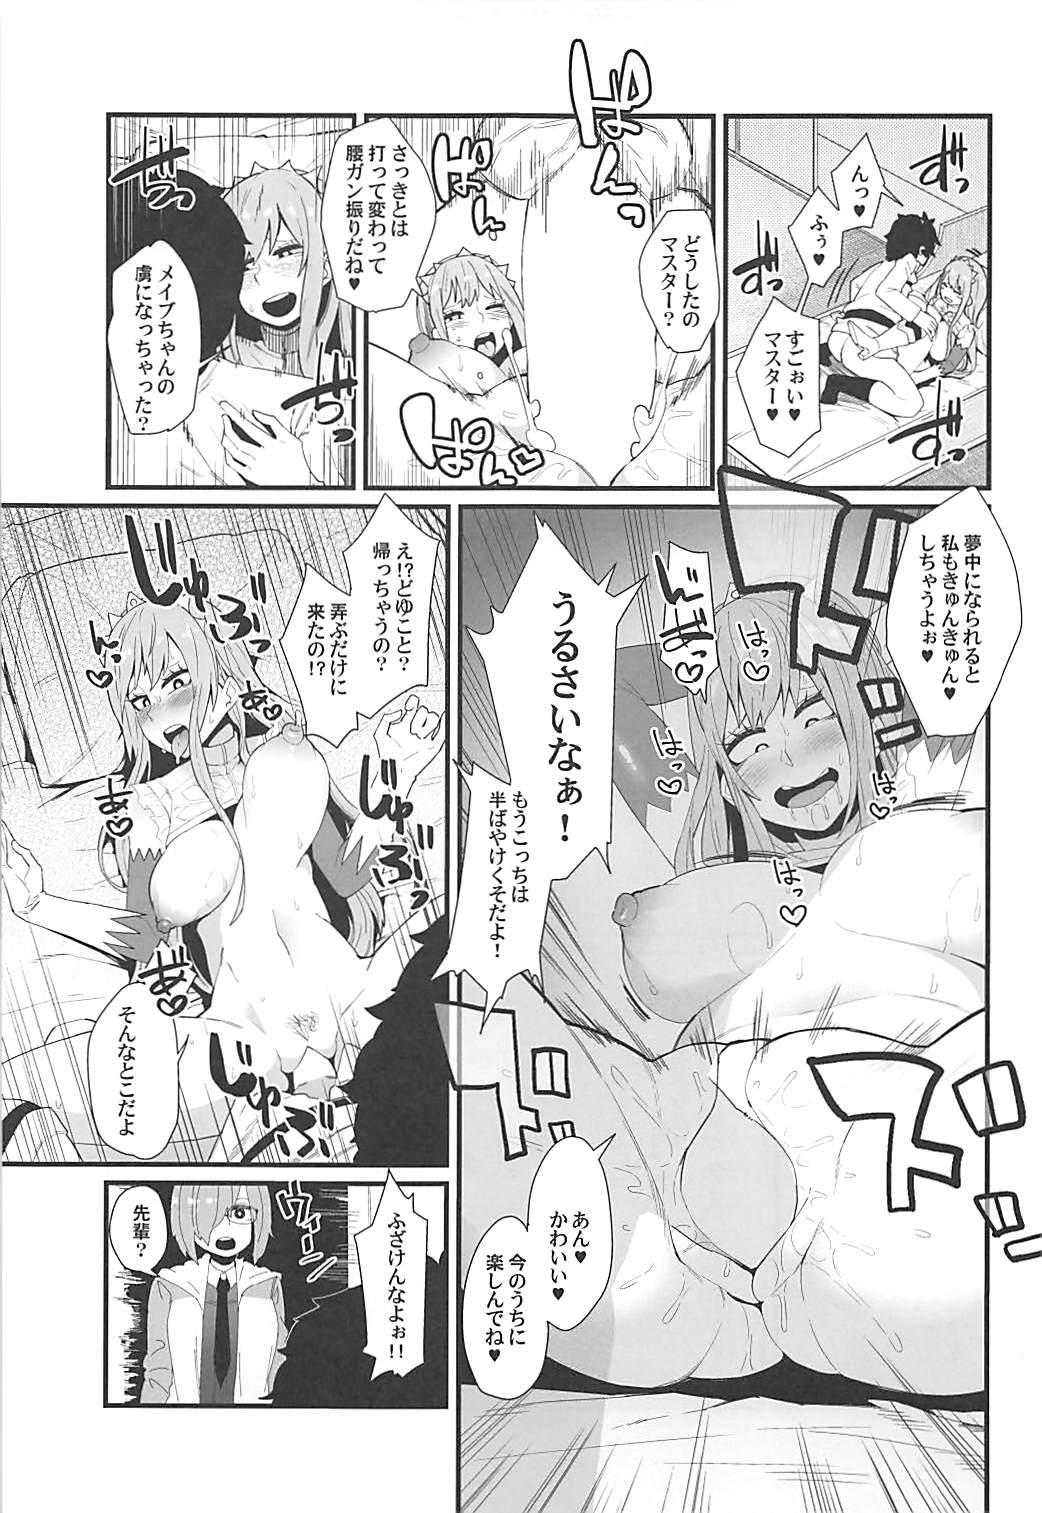 Gozo Gouyoku - In Greedy - Fate grand order Oral Sex - Page 10